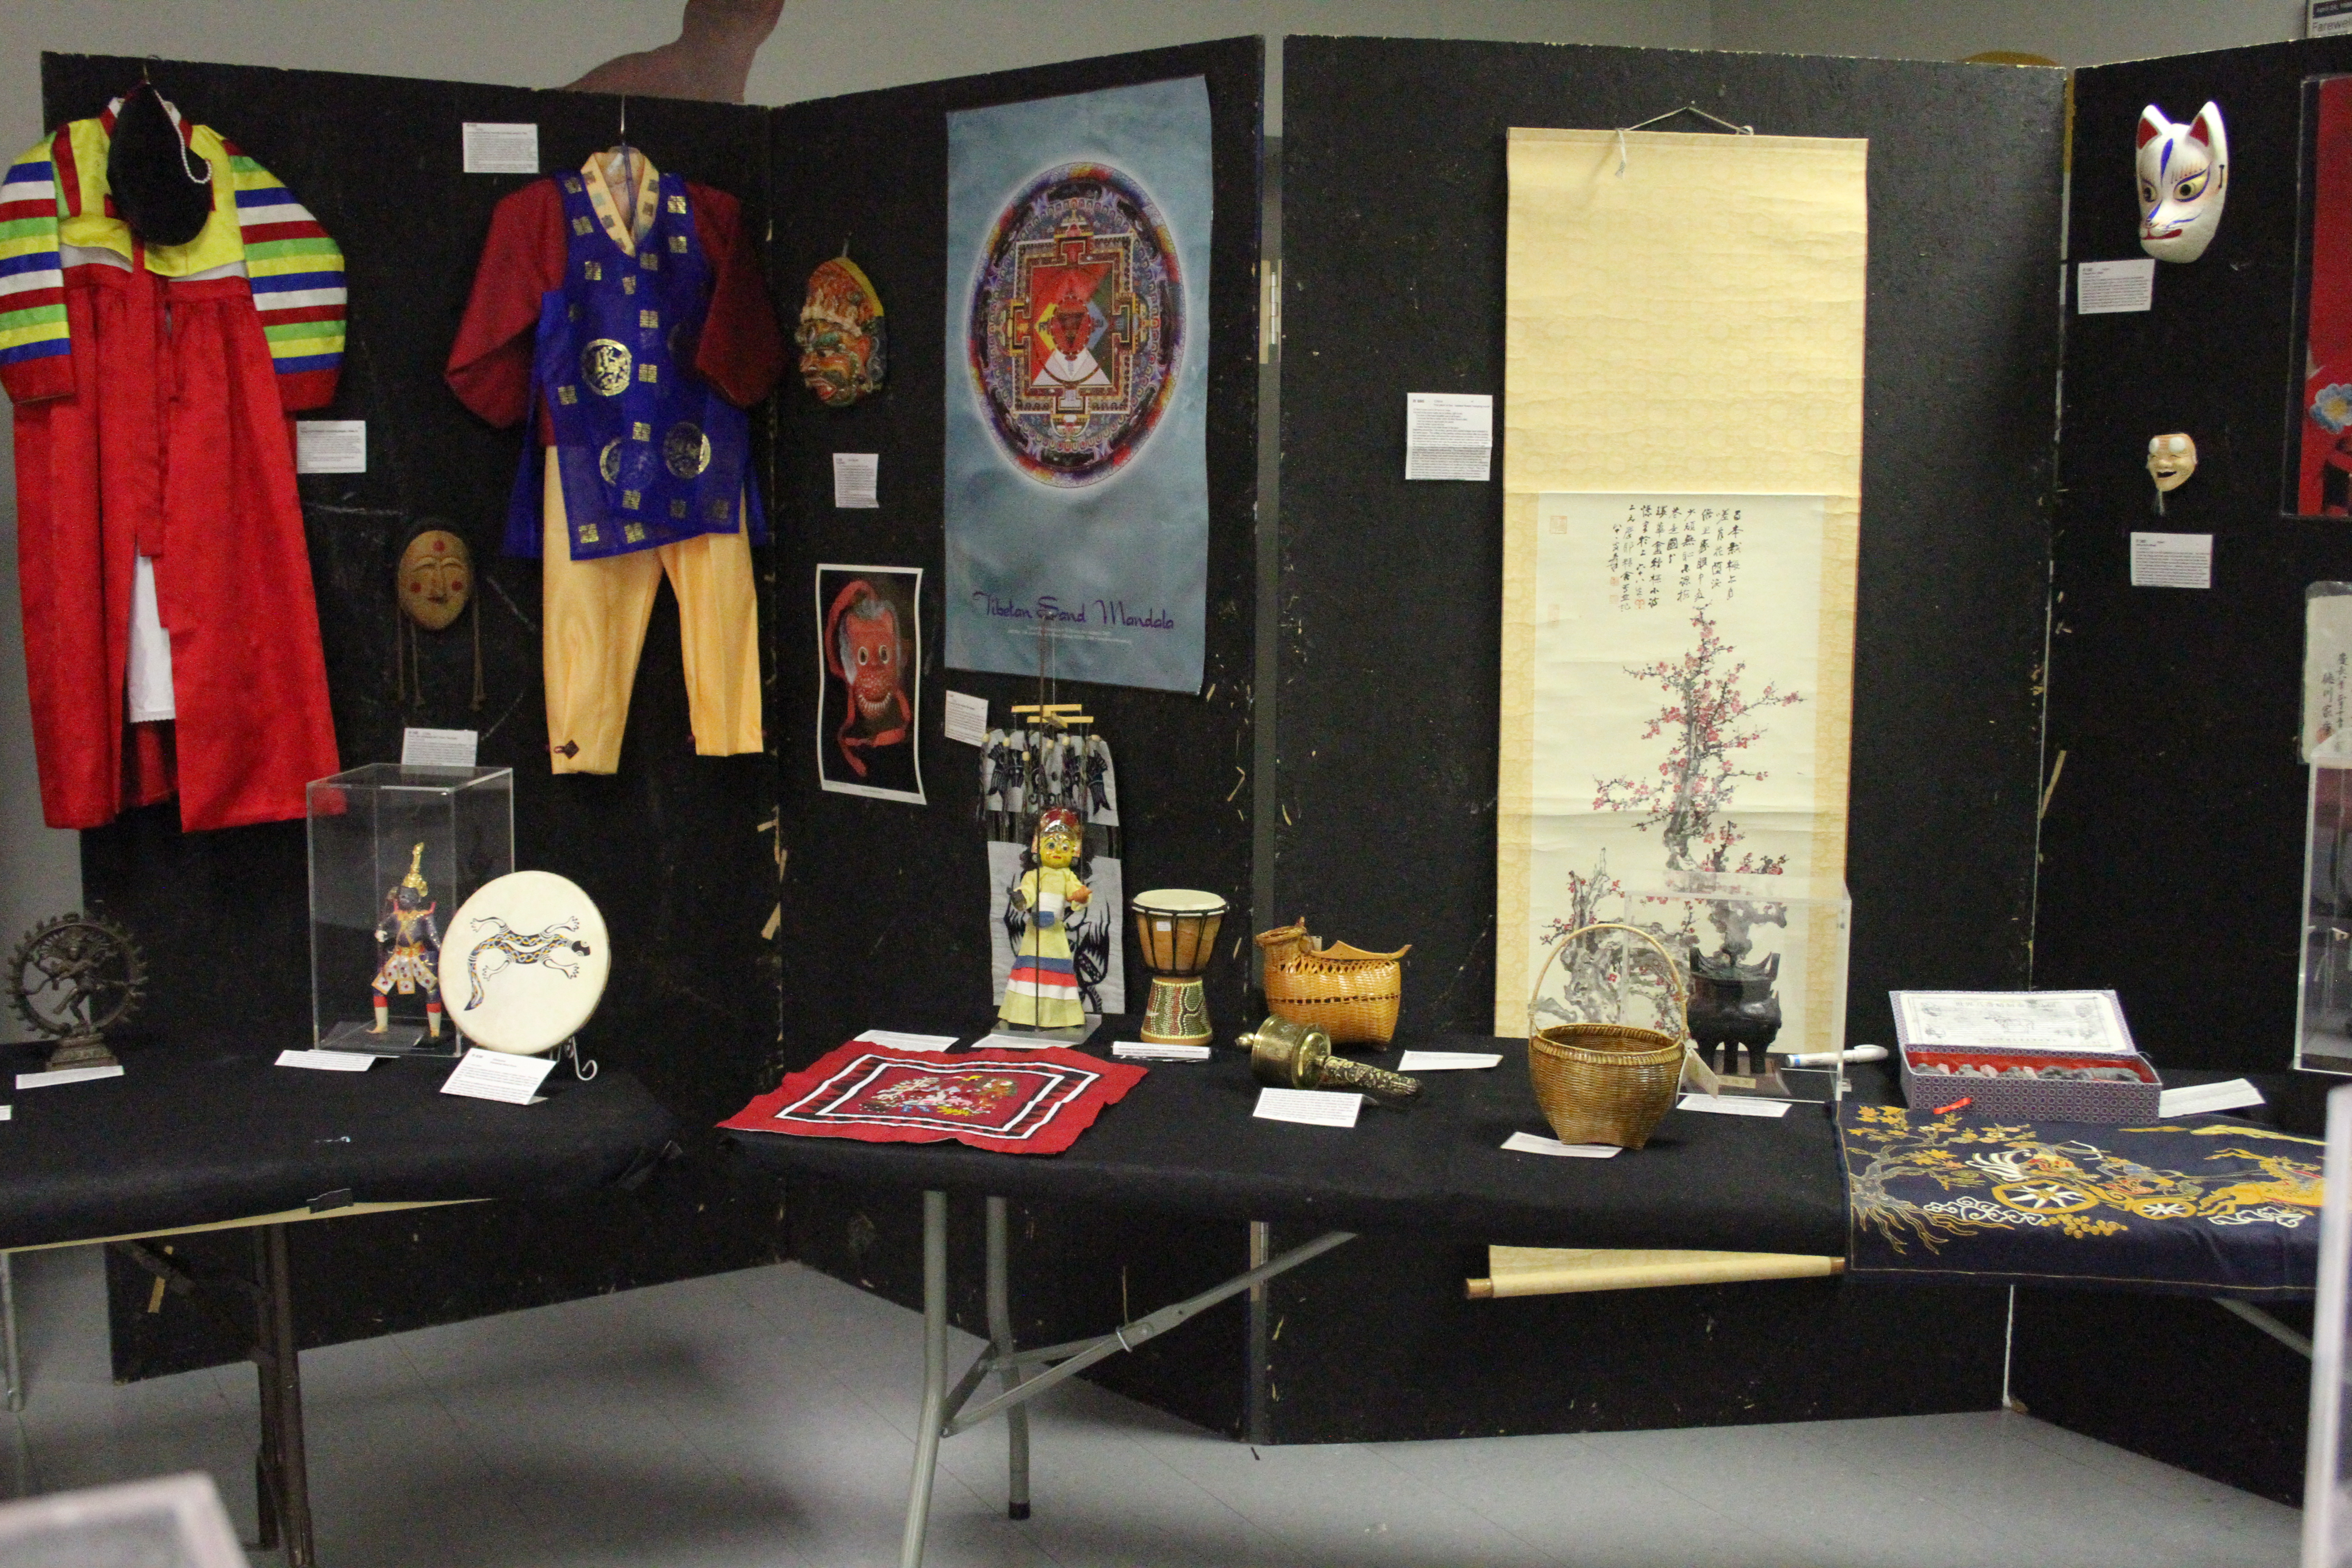 A variety of items from the Giertz Education Center displayed as part of the first annual Danville High School International Festival